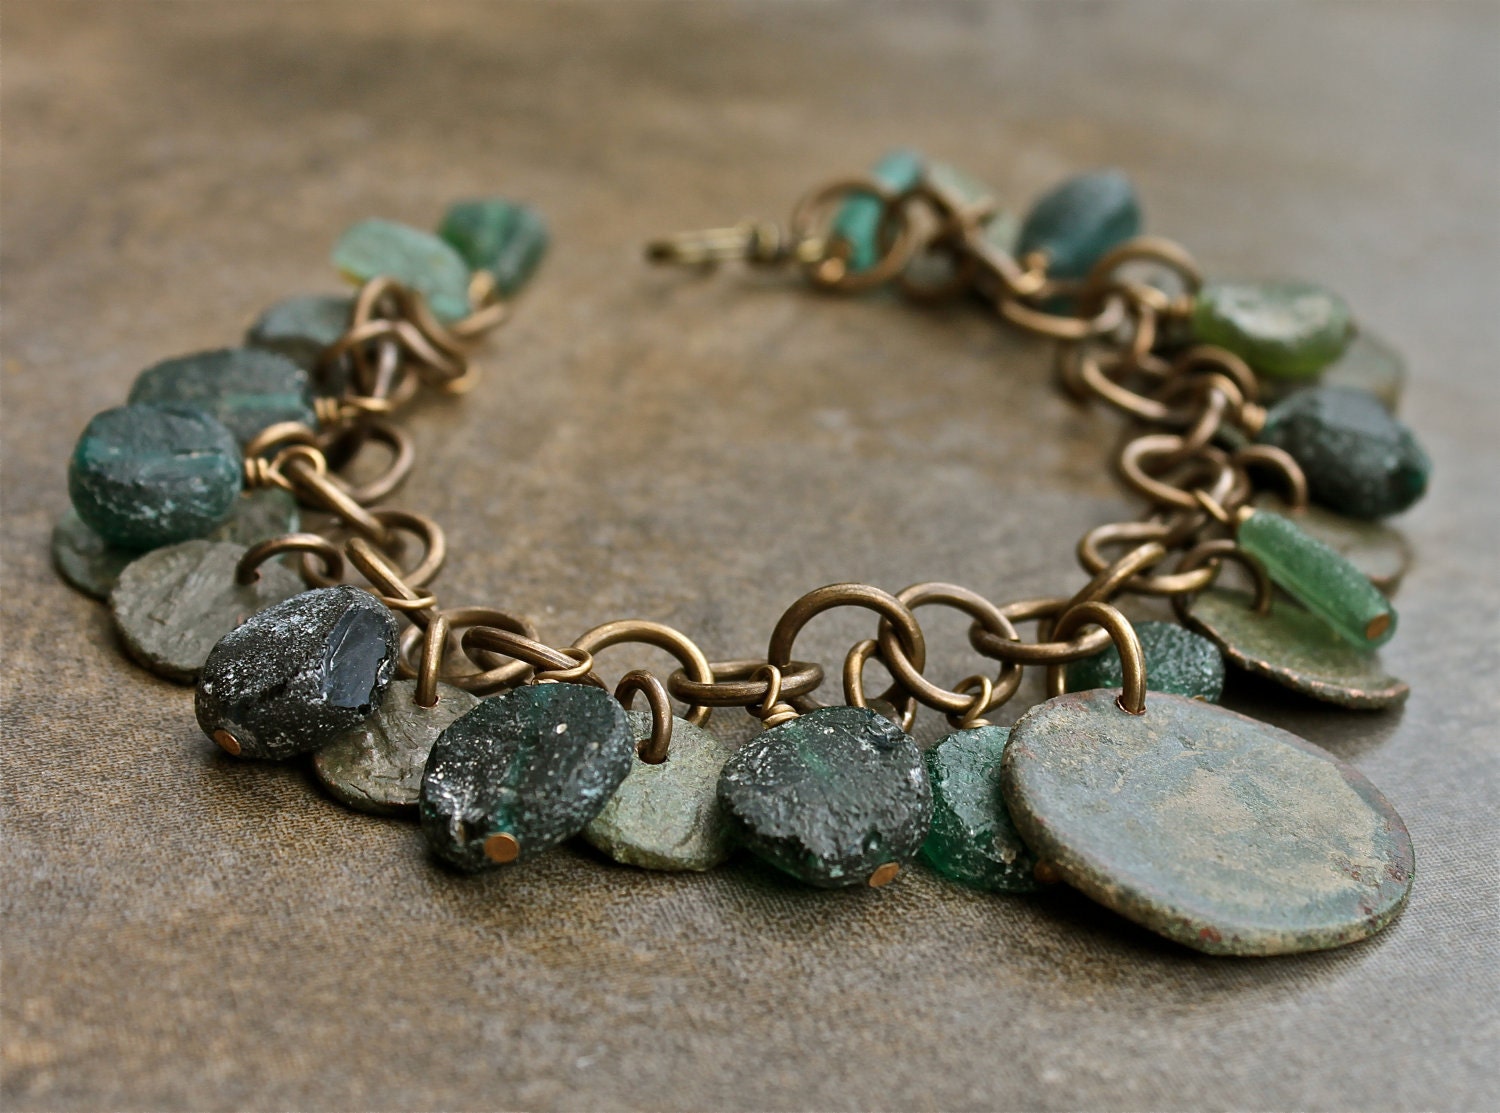 Ancient Roman coin and glass bracelet